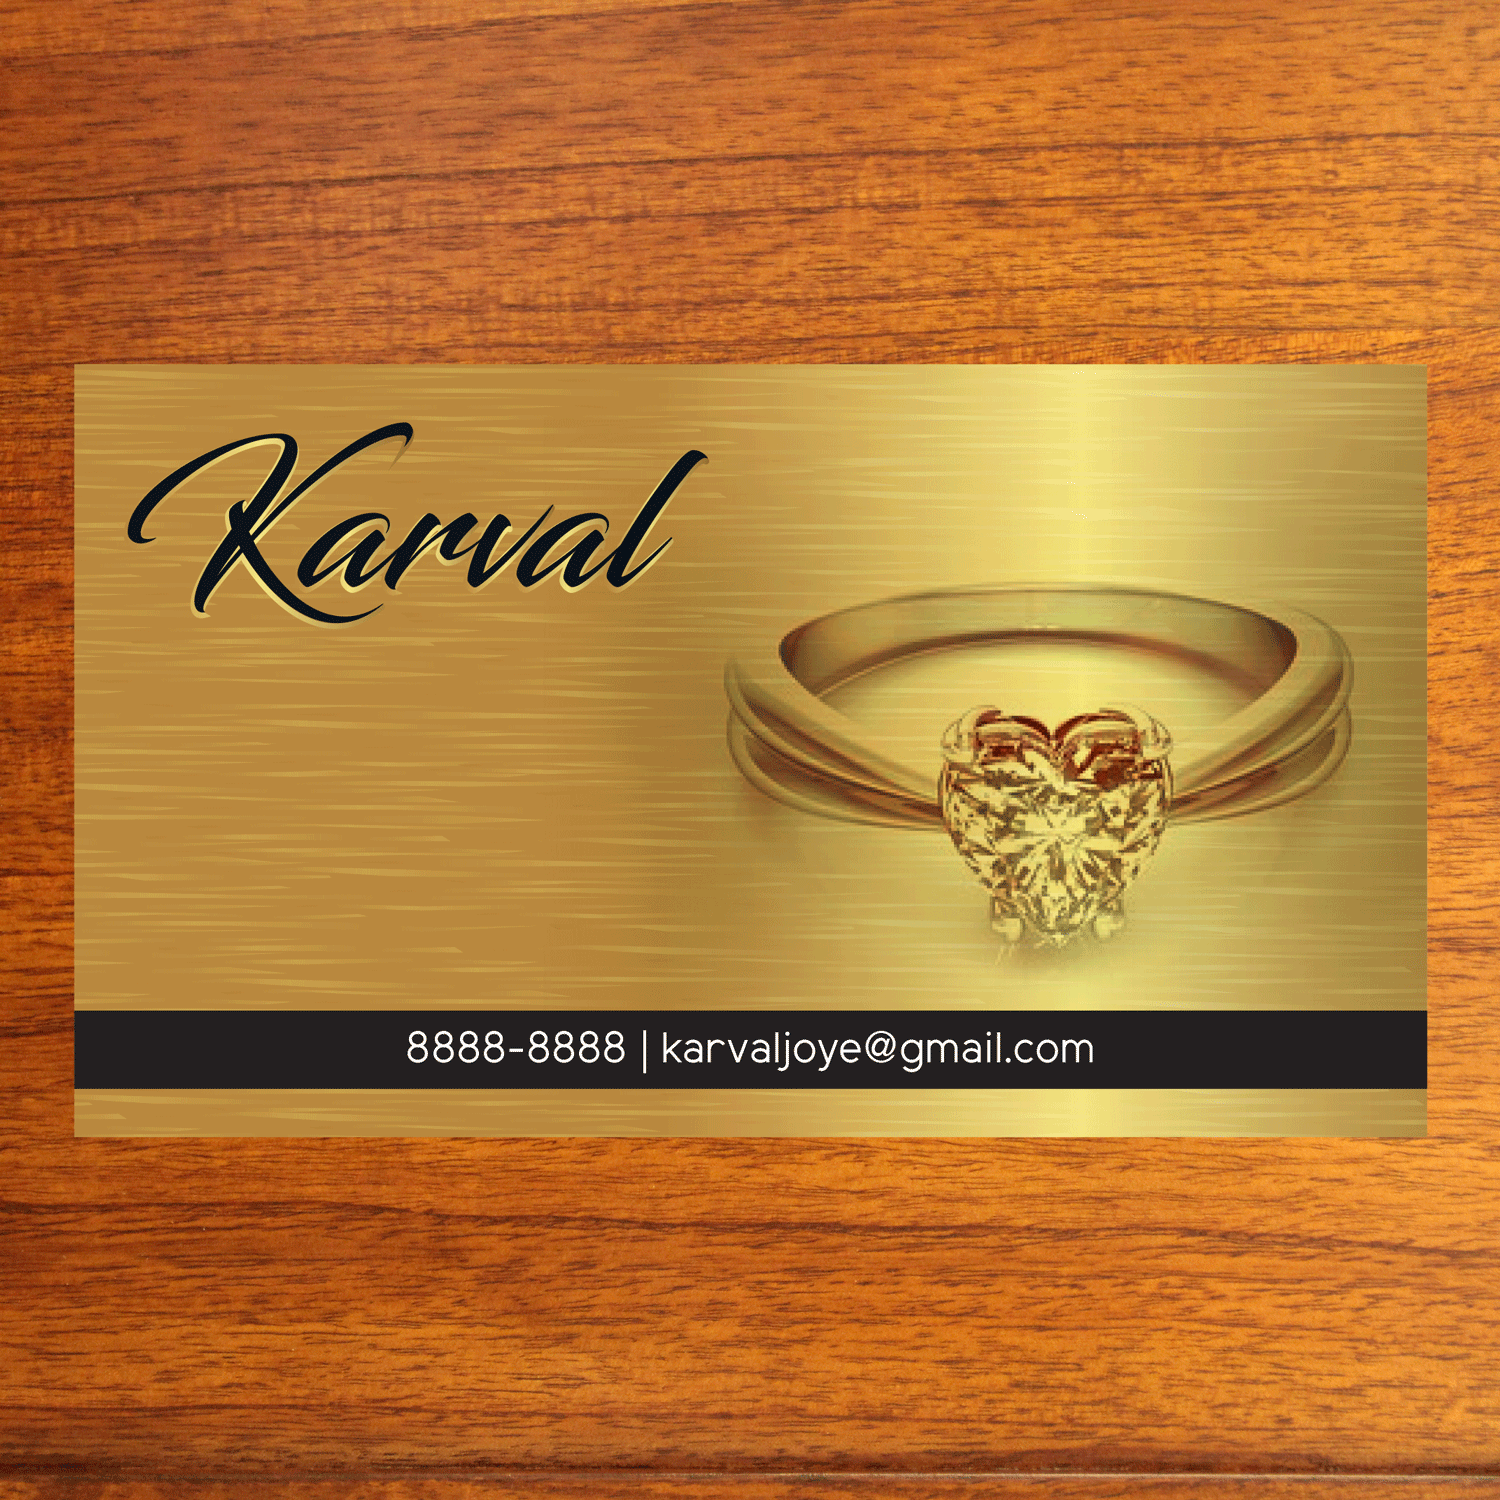 57 Format Visiting Card Templates Jewellery For Free by Visiting Card Templates Jewellery